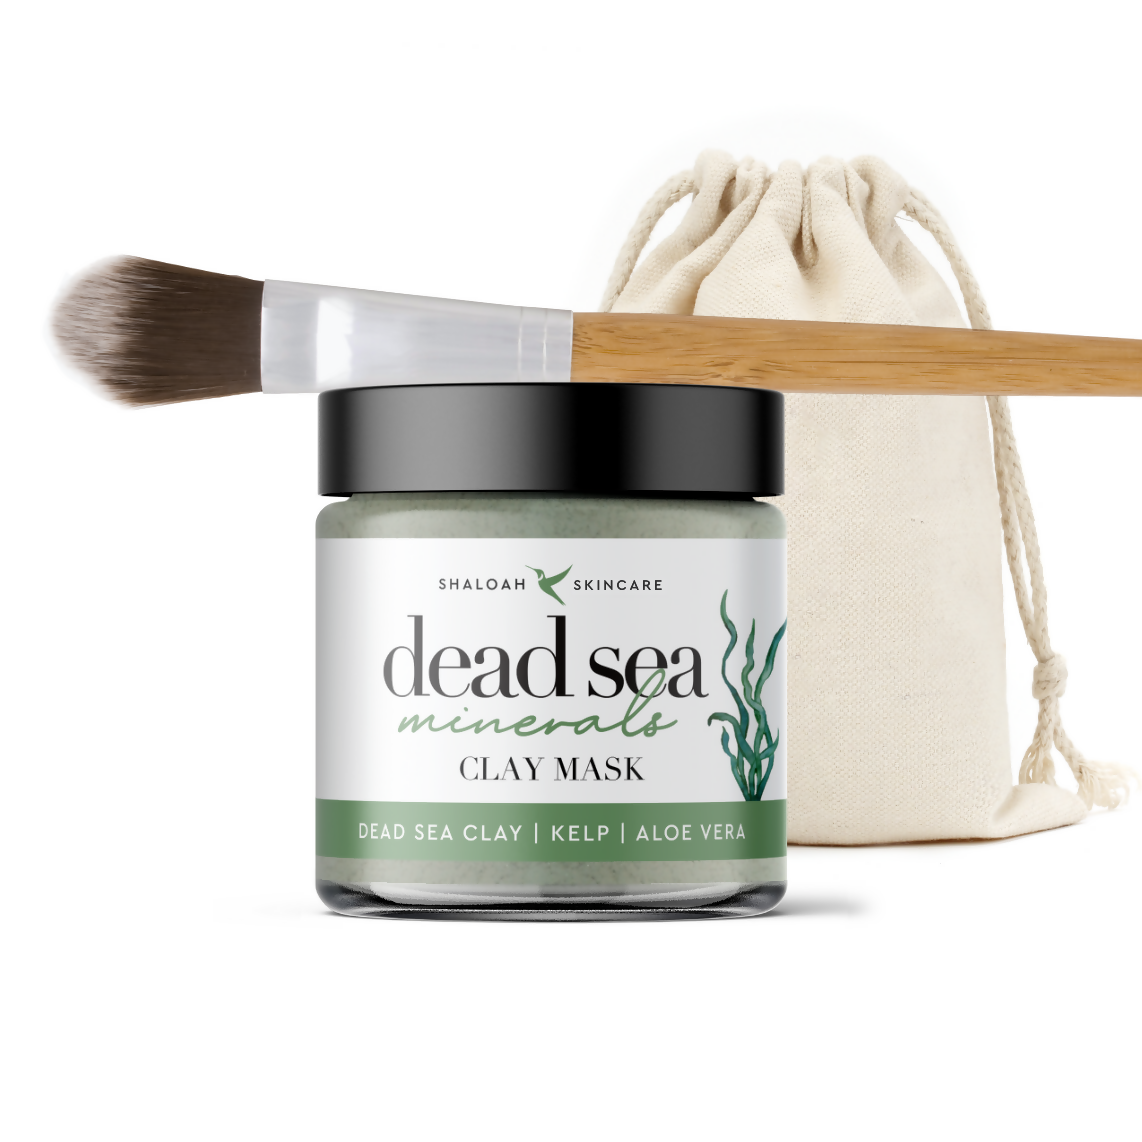 Dead Sea Minerals Clay Mask with dead sea clay